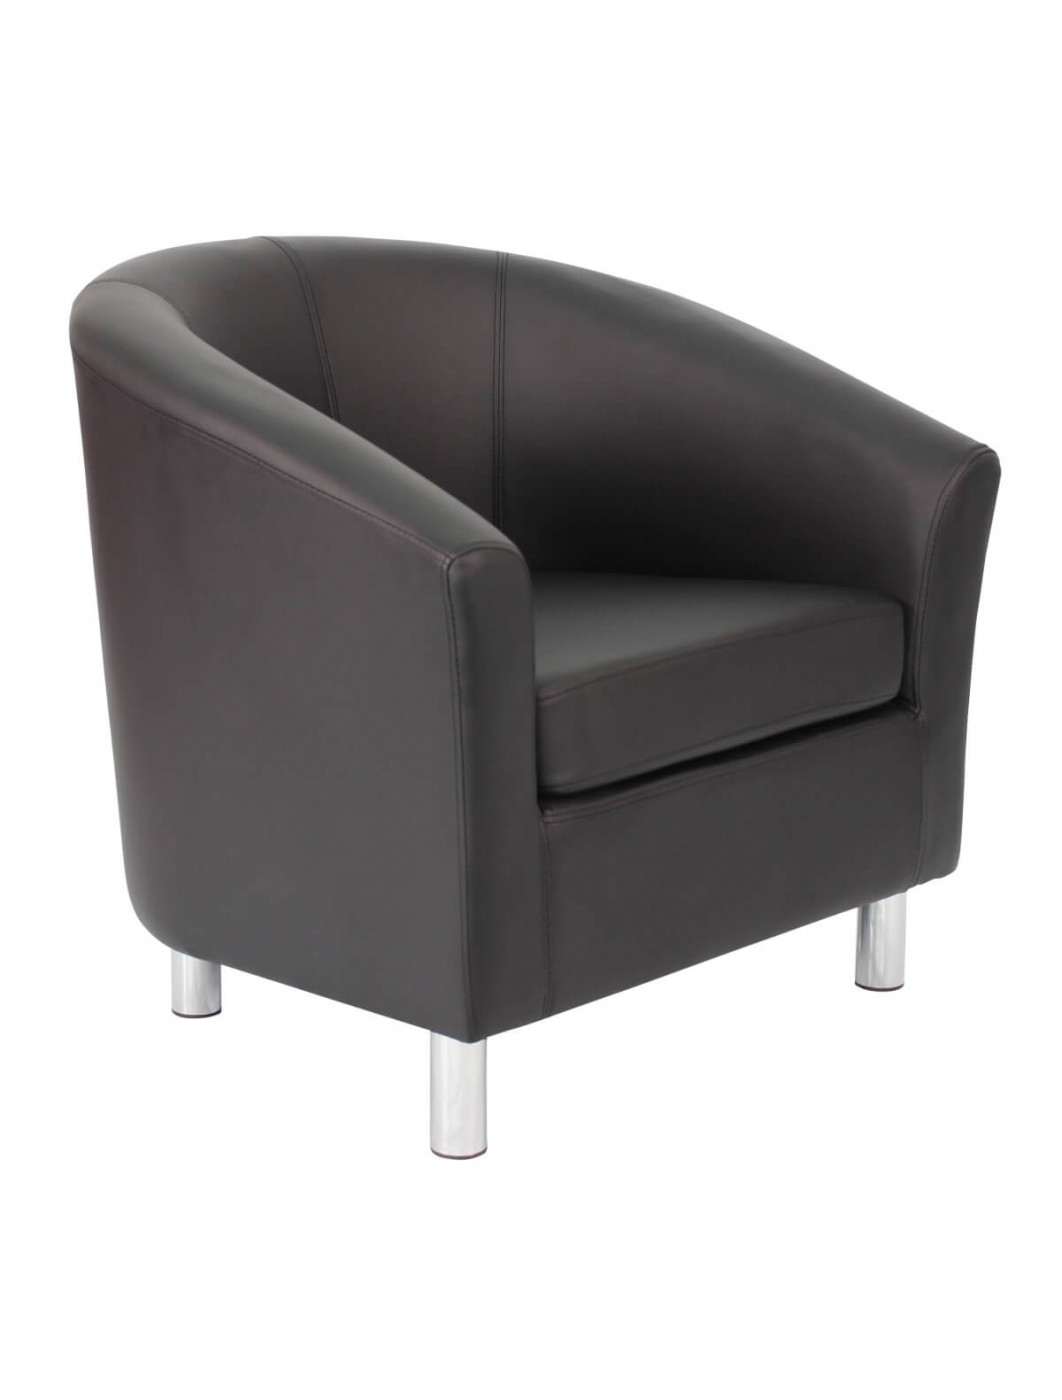 Armchair - PU Leather Tub Chair OF2201ML Reception Chairs - enlarged view